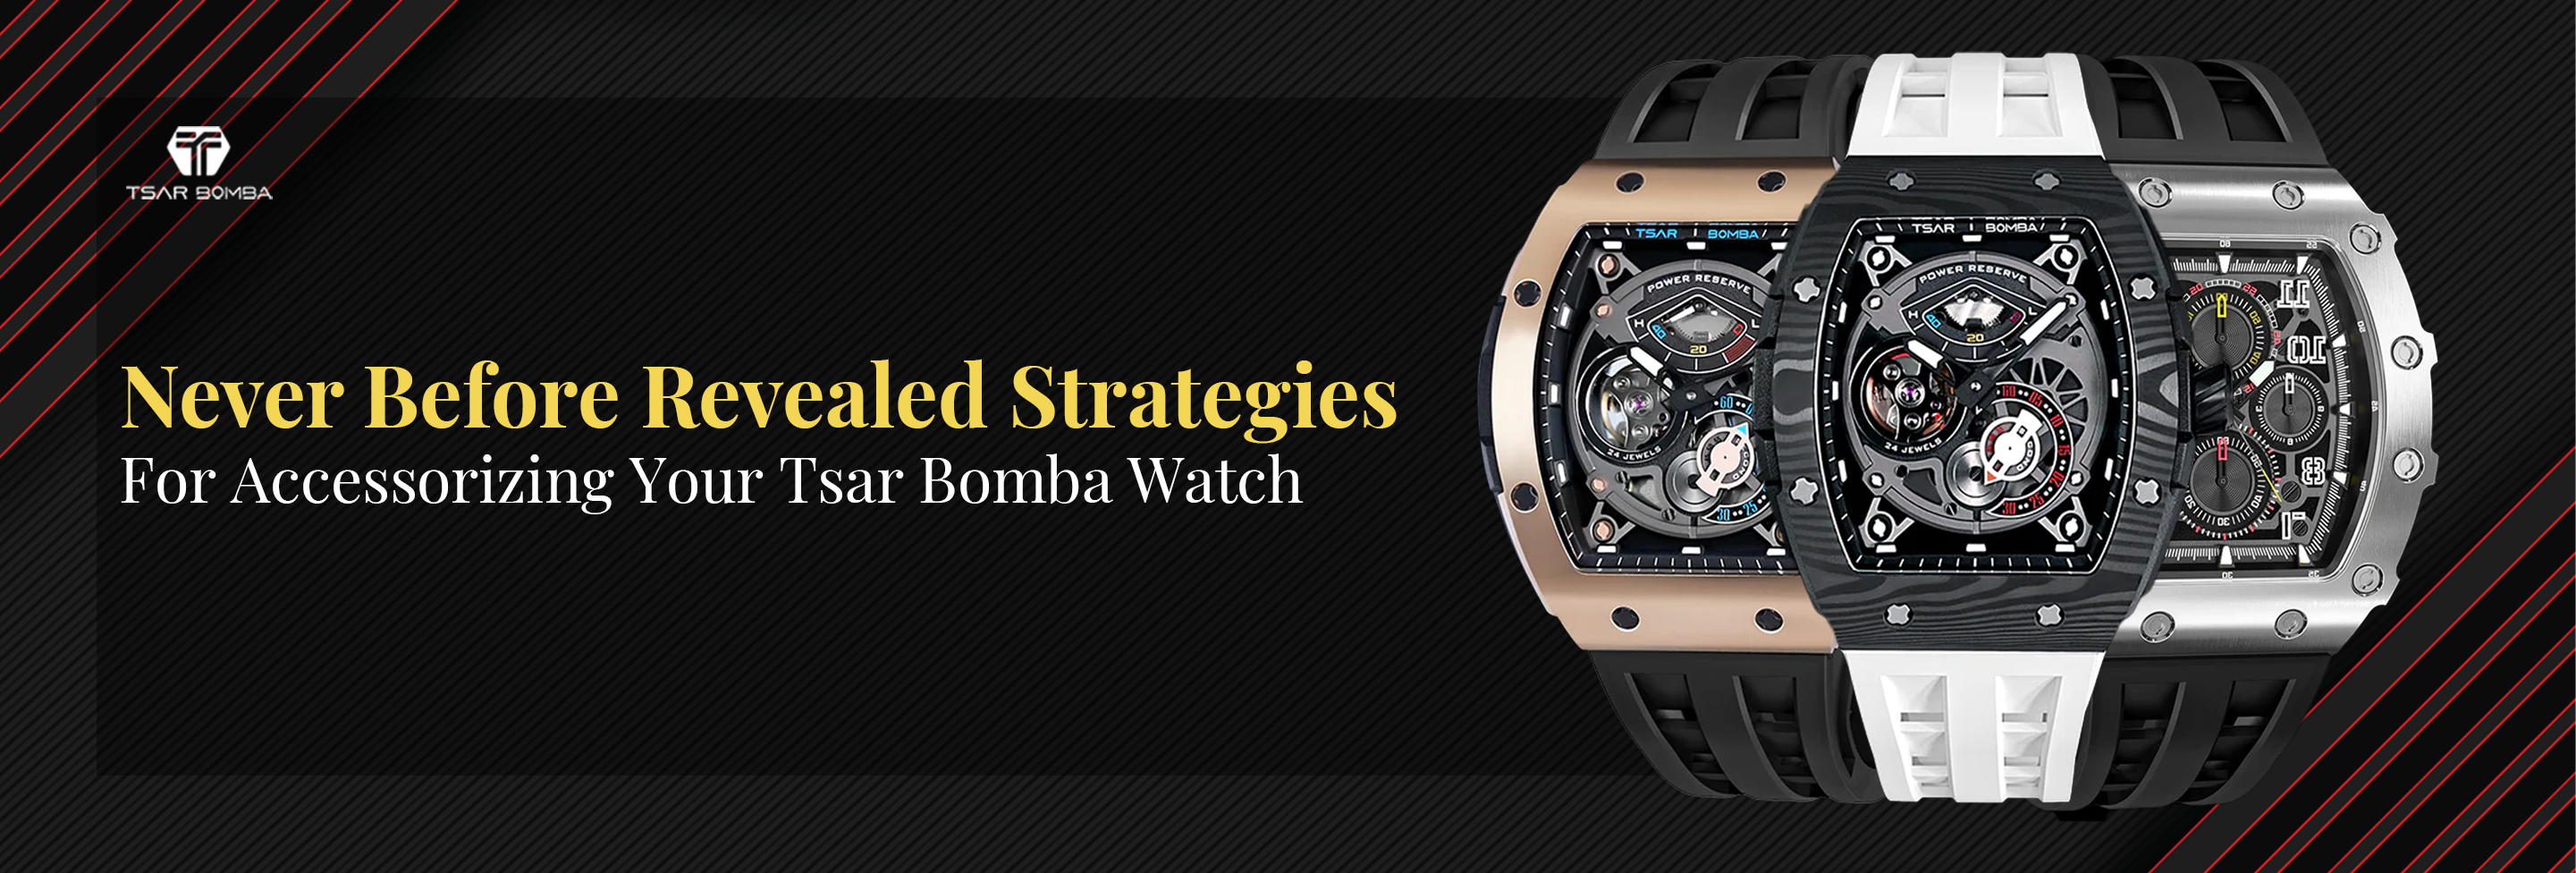 Never Before Revealed Strategies For Accessorizing Your Tsar Bomba Watch